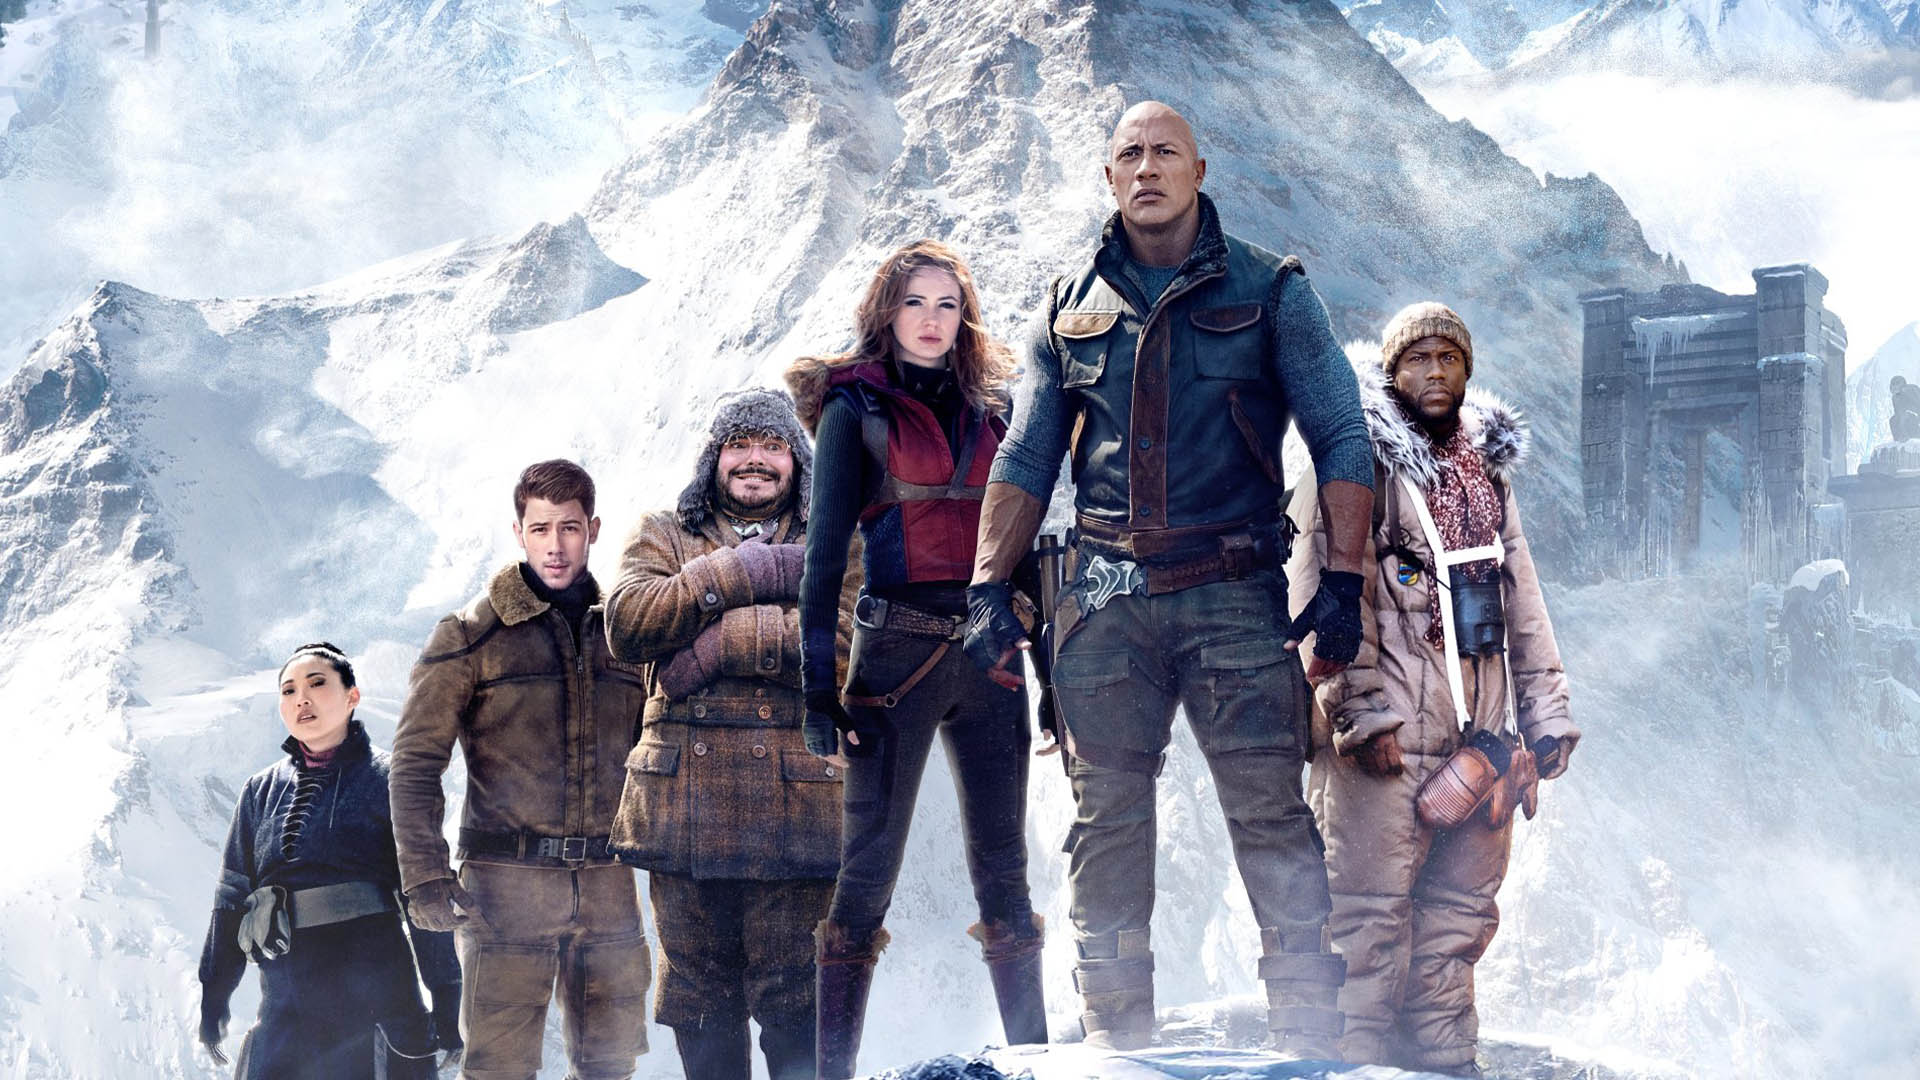 The main characters of the Jumanji movie series are among the snow-capped mountains